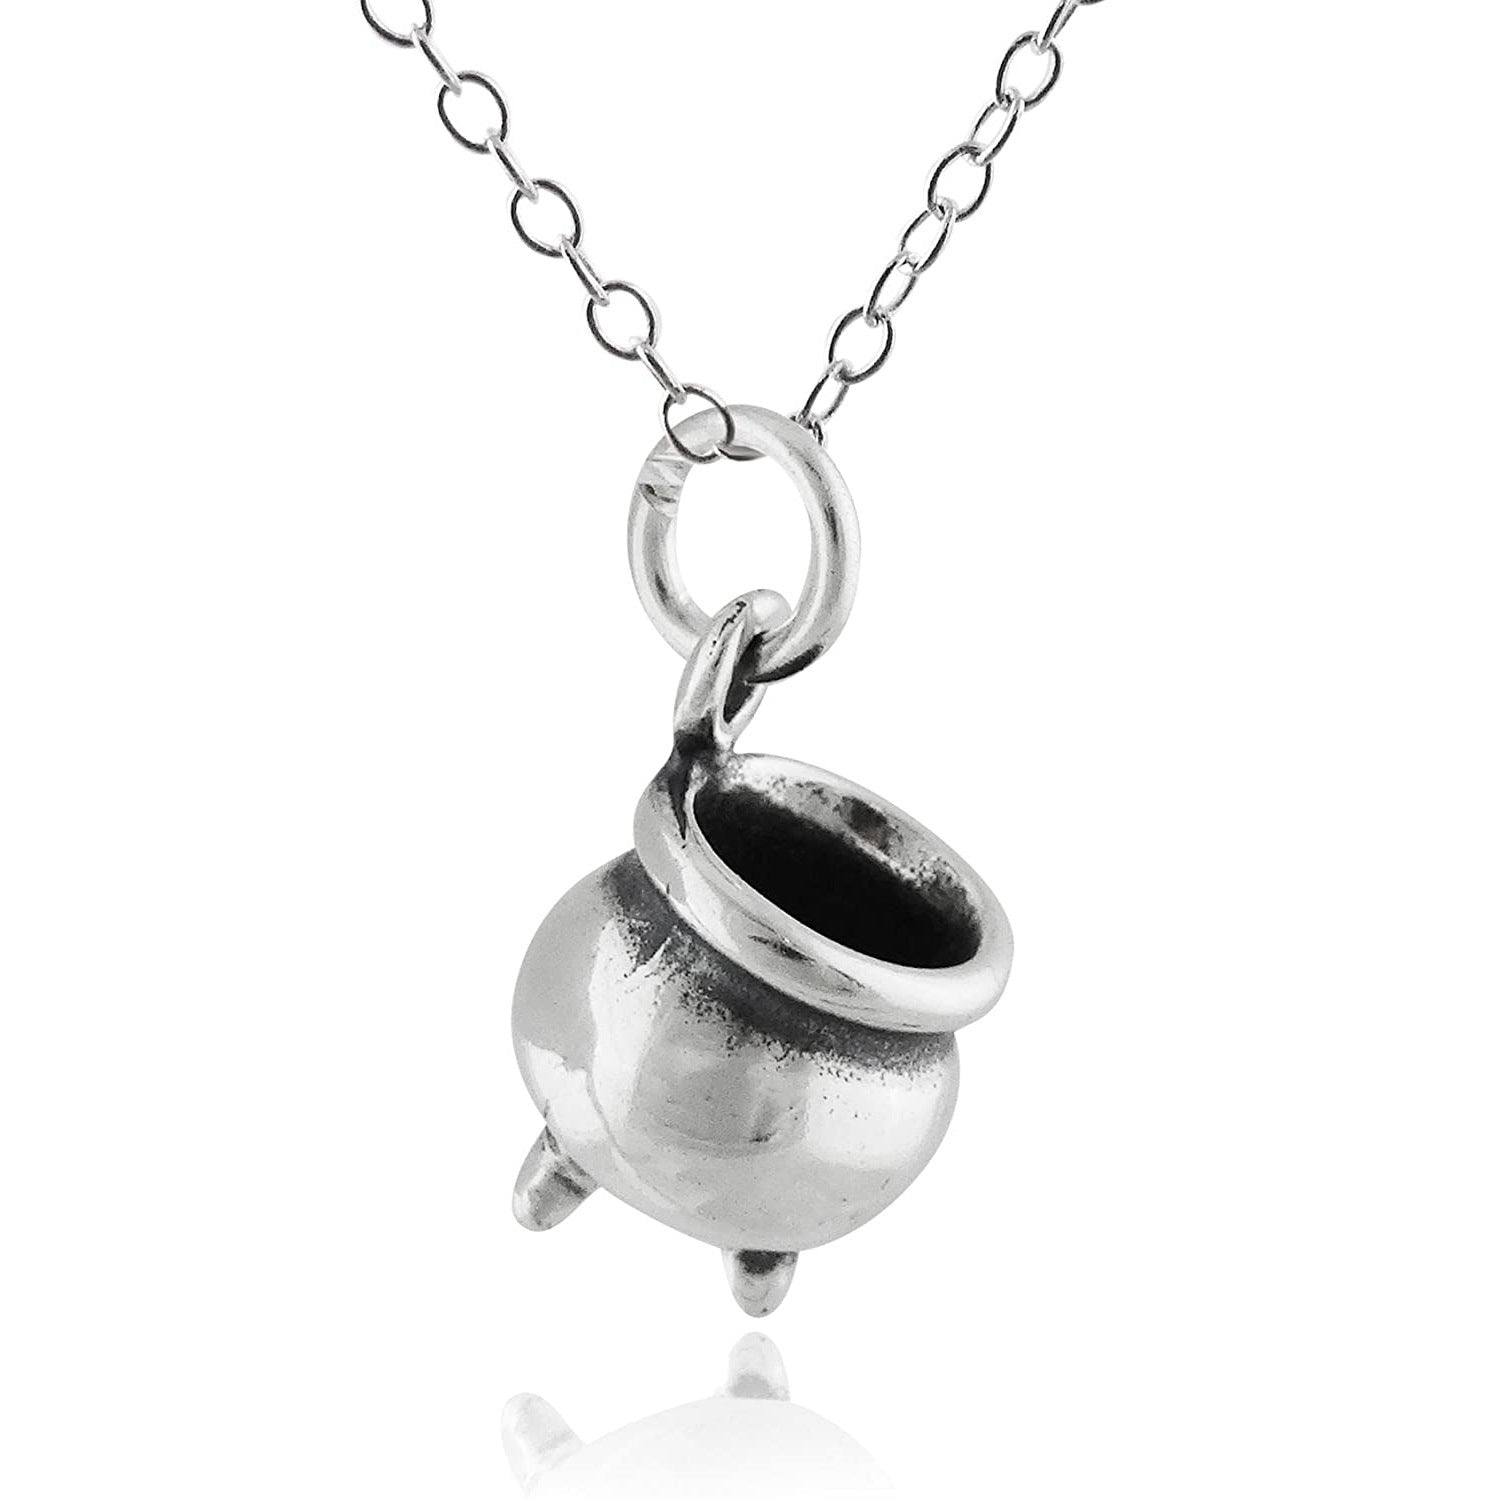 A small silver pot hanging on a chain is the Halloween Jewelry Halloween Wizard Pendant by Maramalive™.